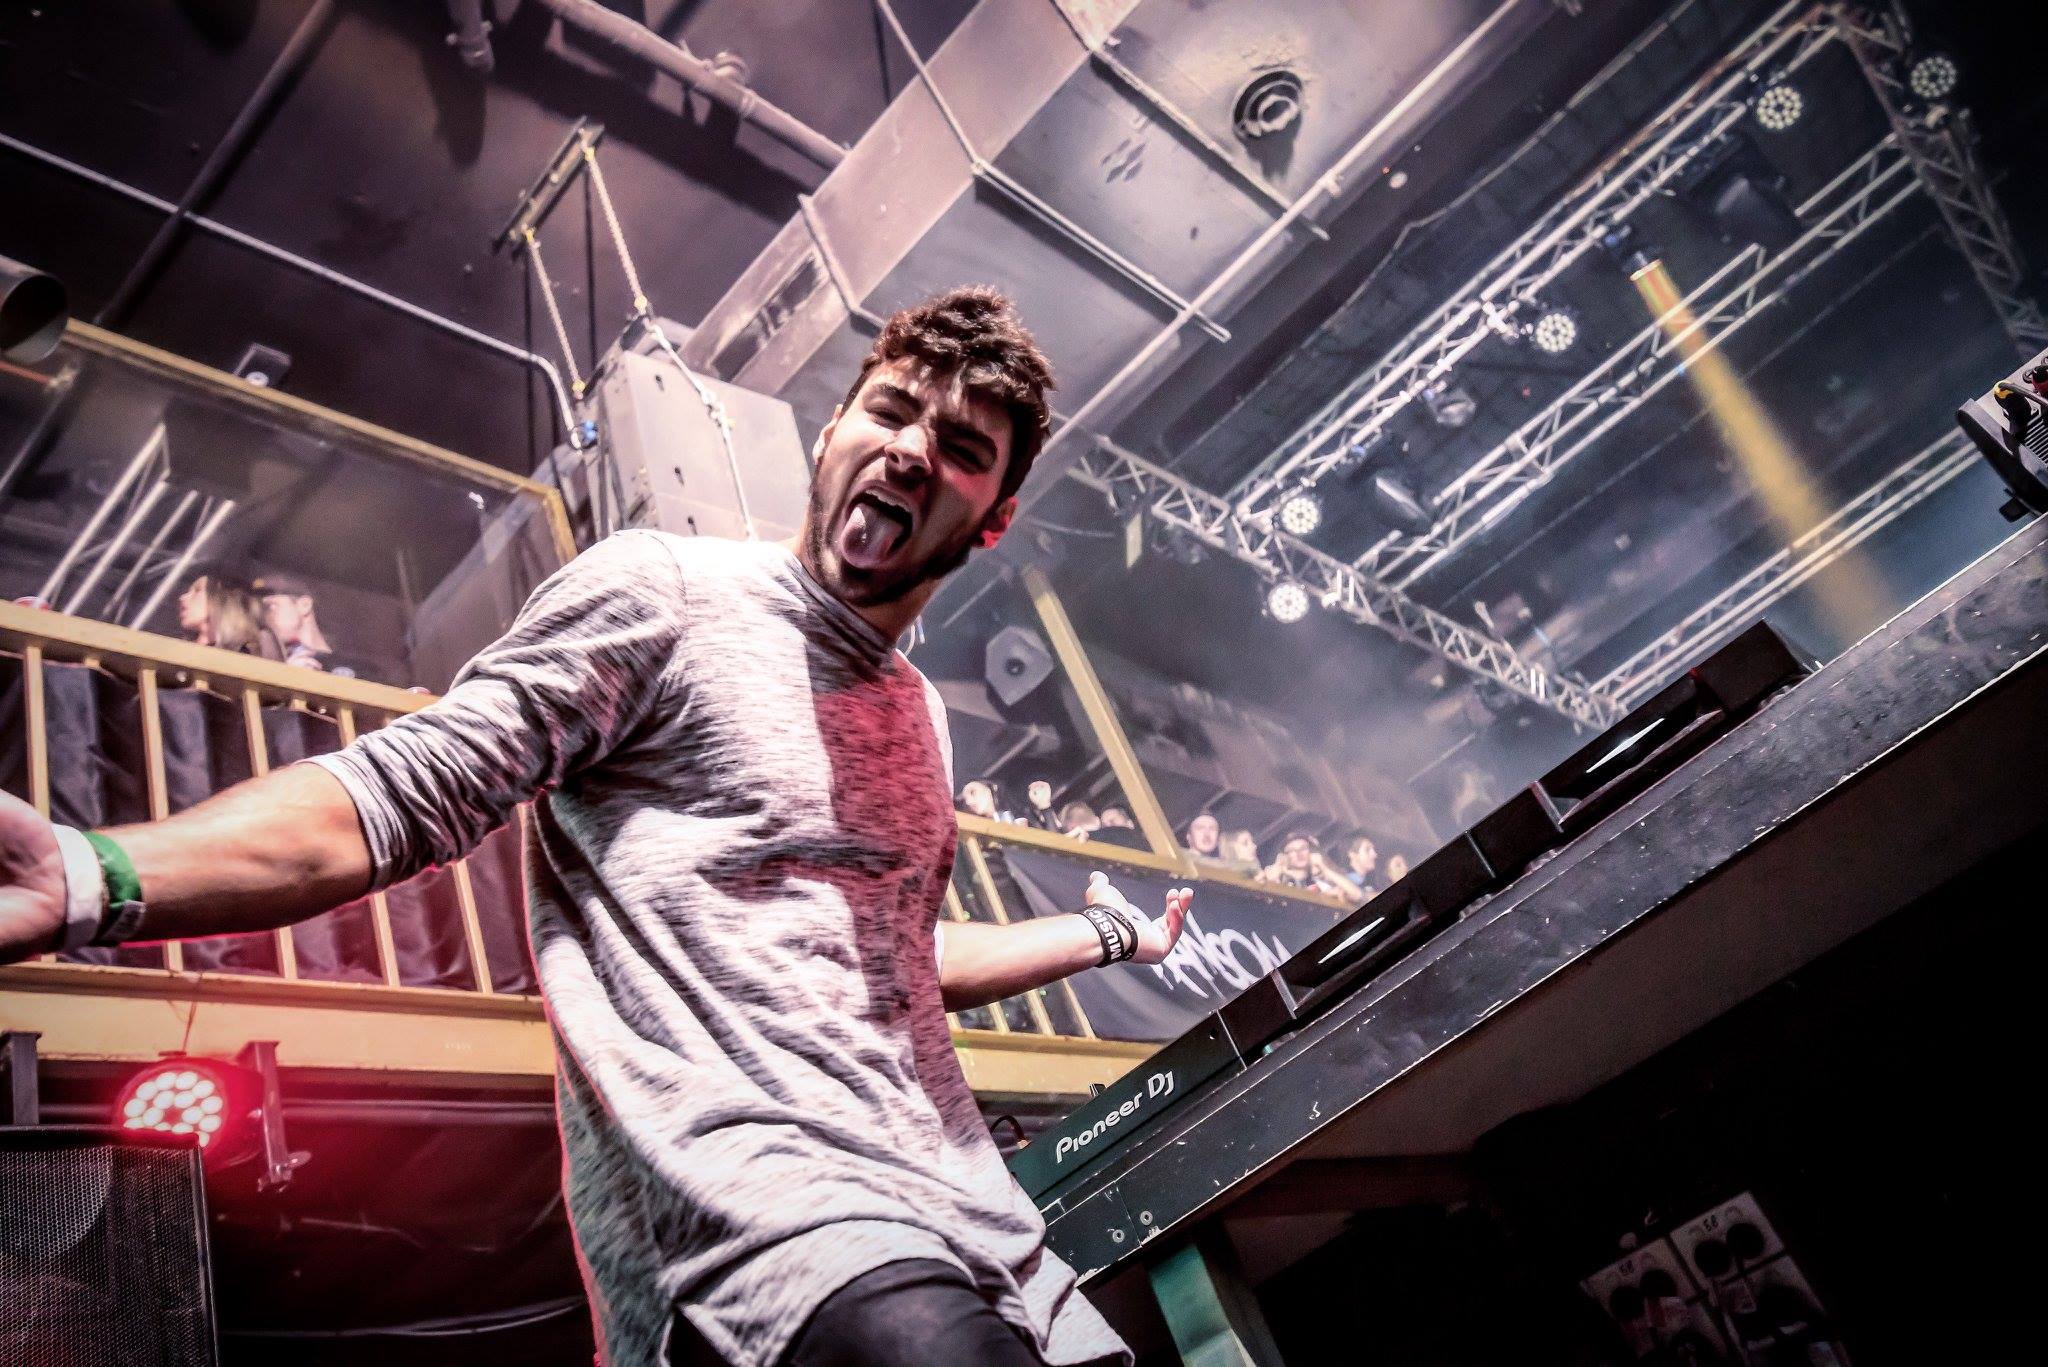 Crankdat Sets Sail on the S.S. Feels With His Remix Of Lil Yachty’s “1 Night”